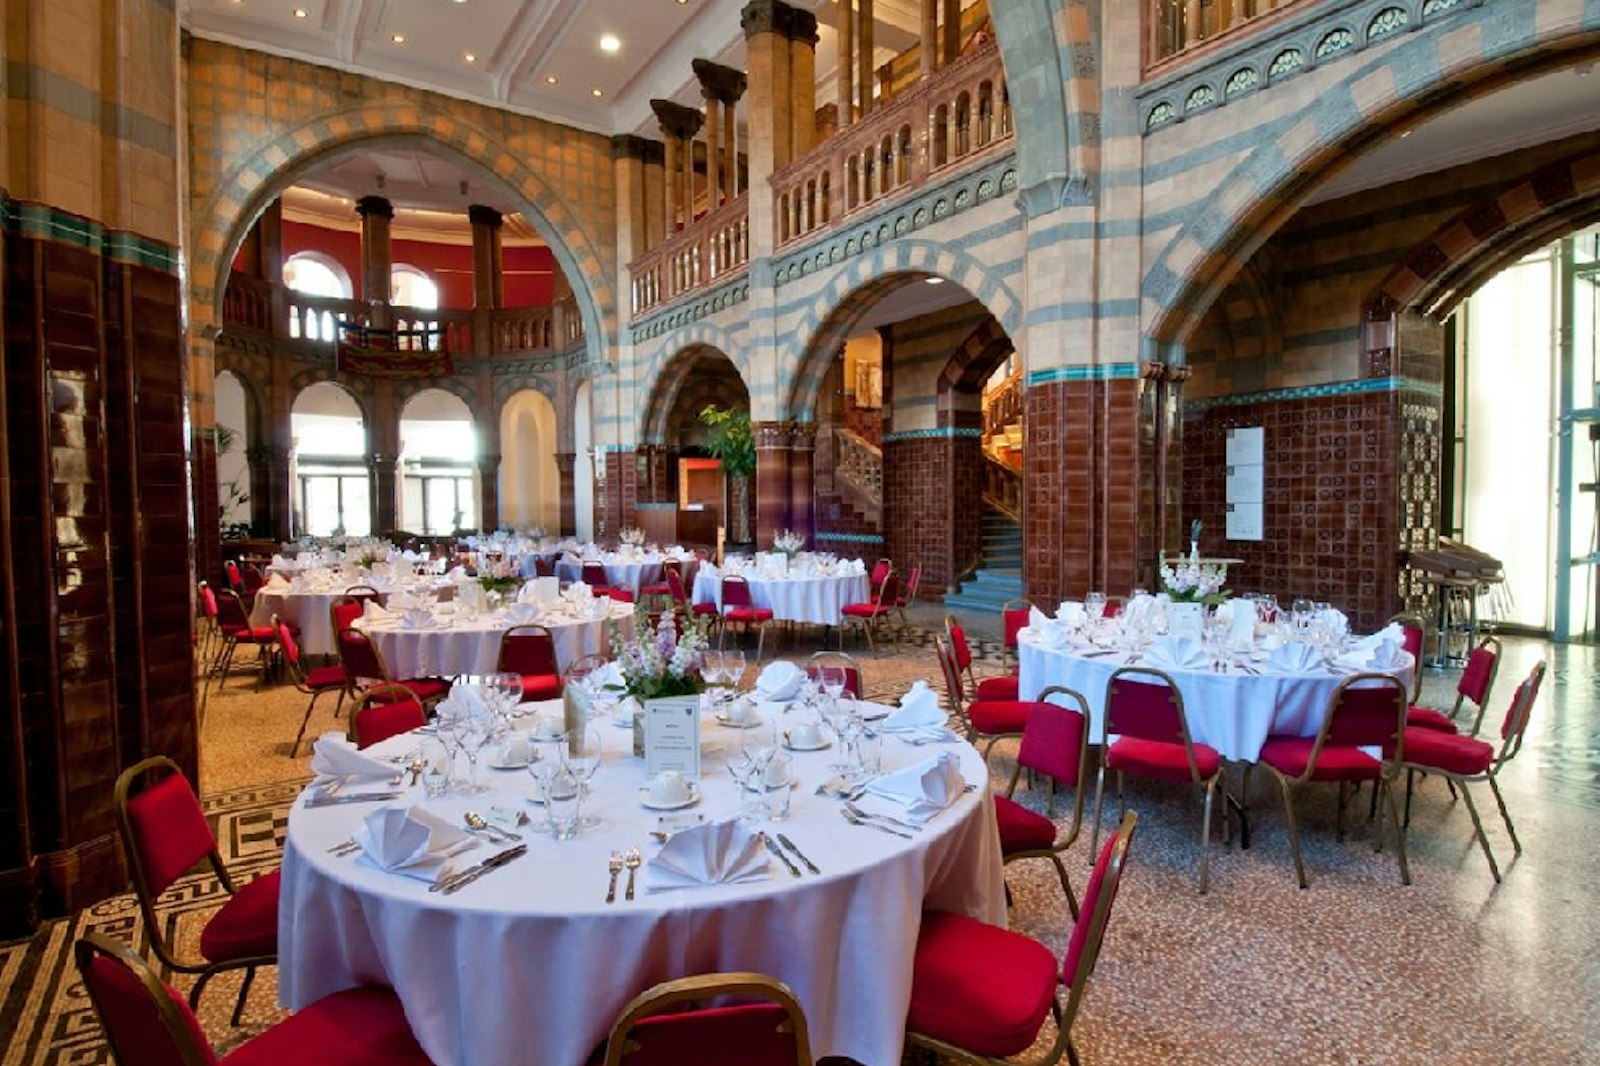 Wedding Reception Venues in Liverpool - Victoria Gallery & Museum - Weddings in The Grand Entrance Hall - Banner